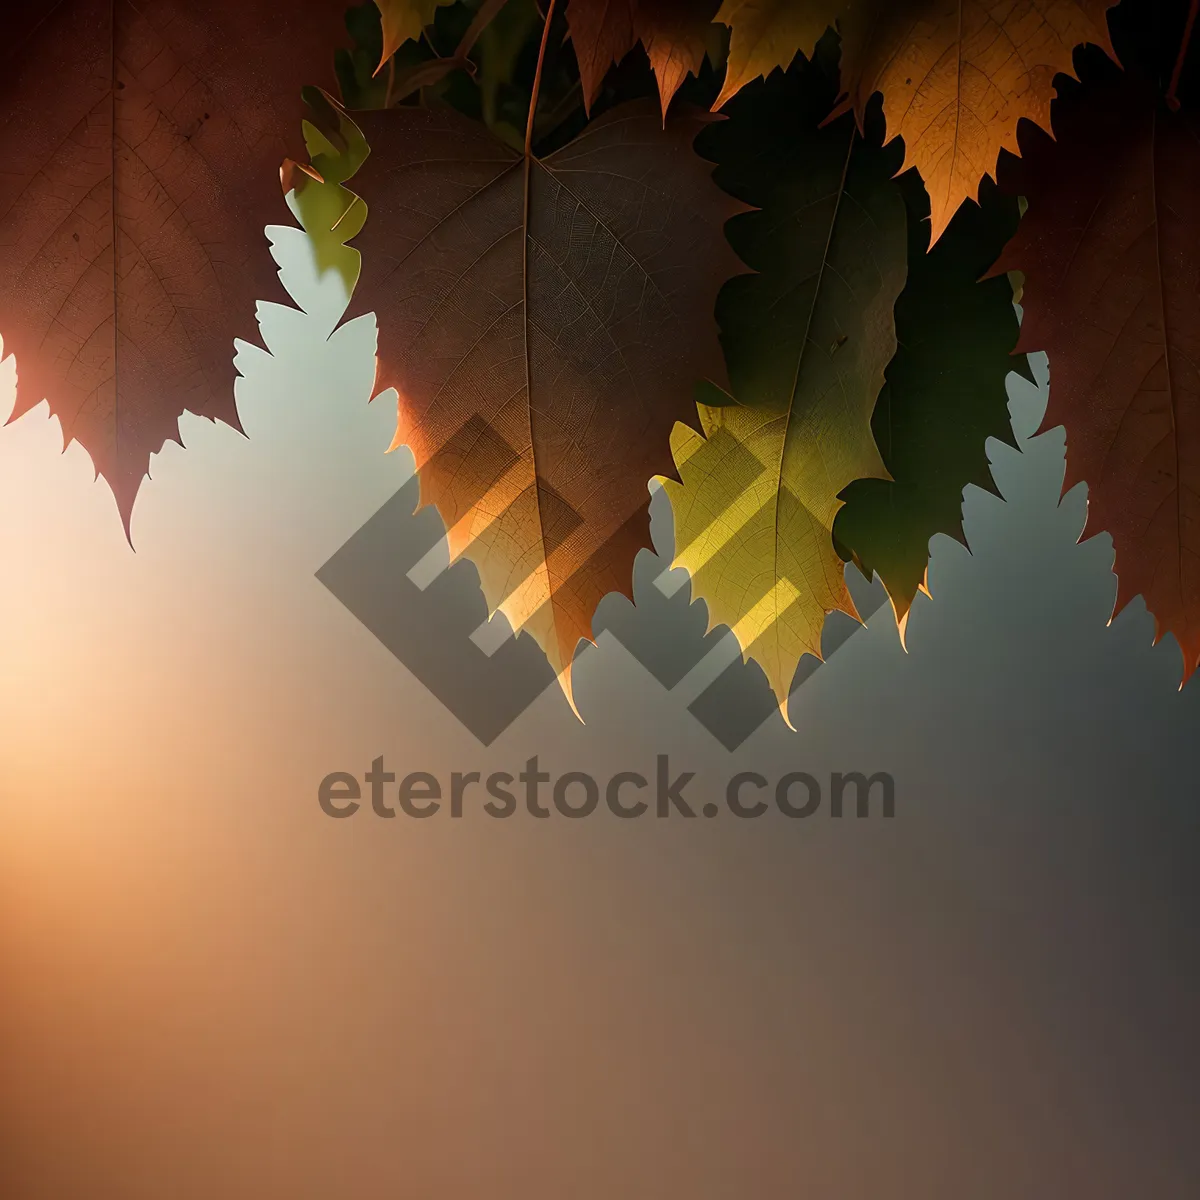 Picture of Golden Autumn Leaves on Oak Tree